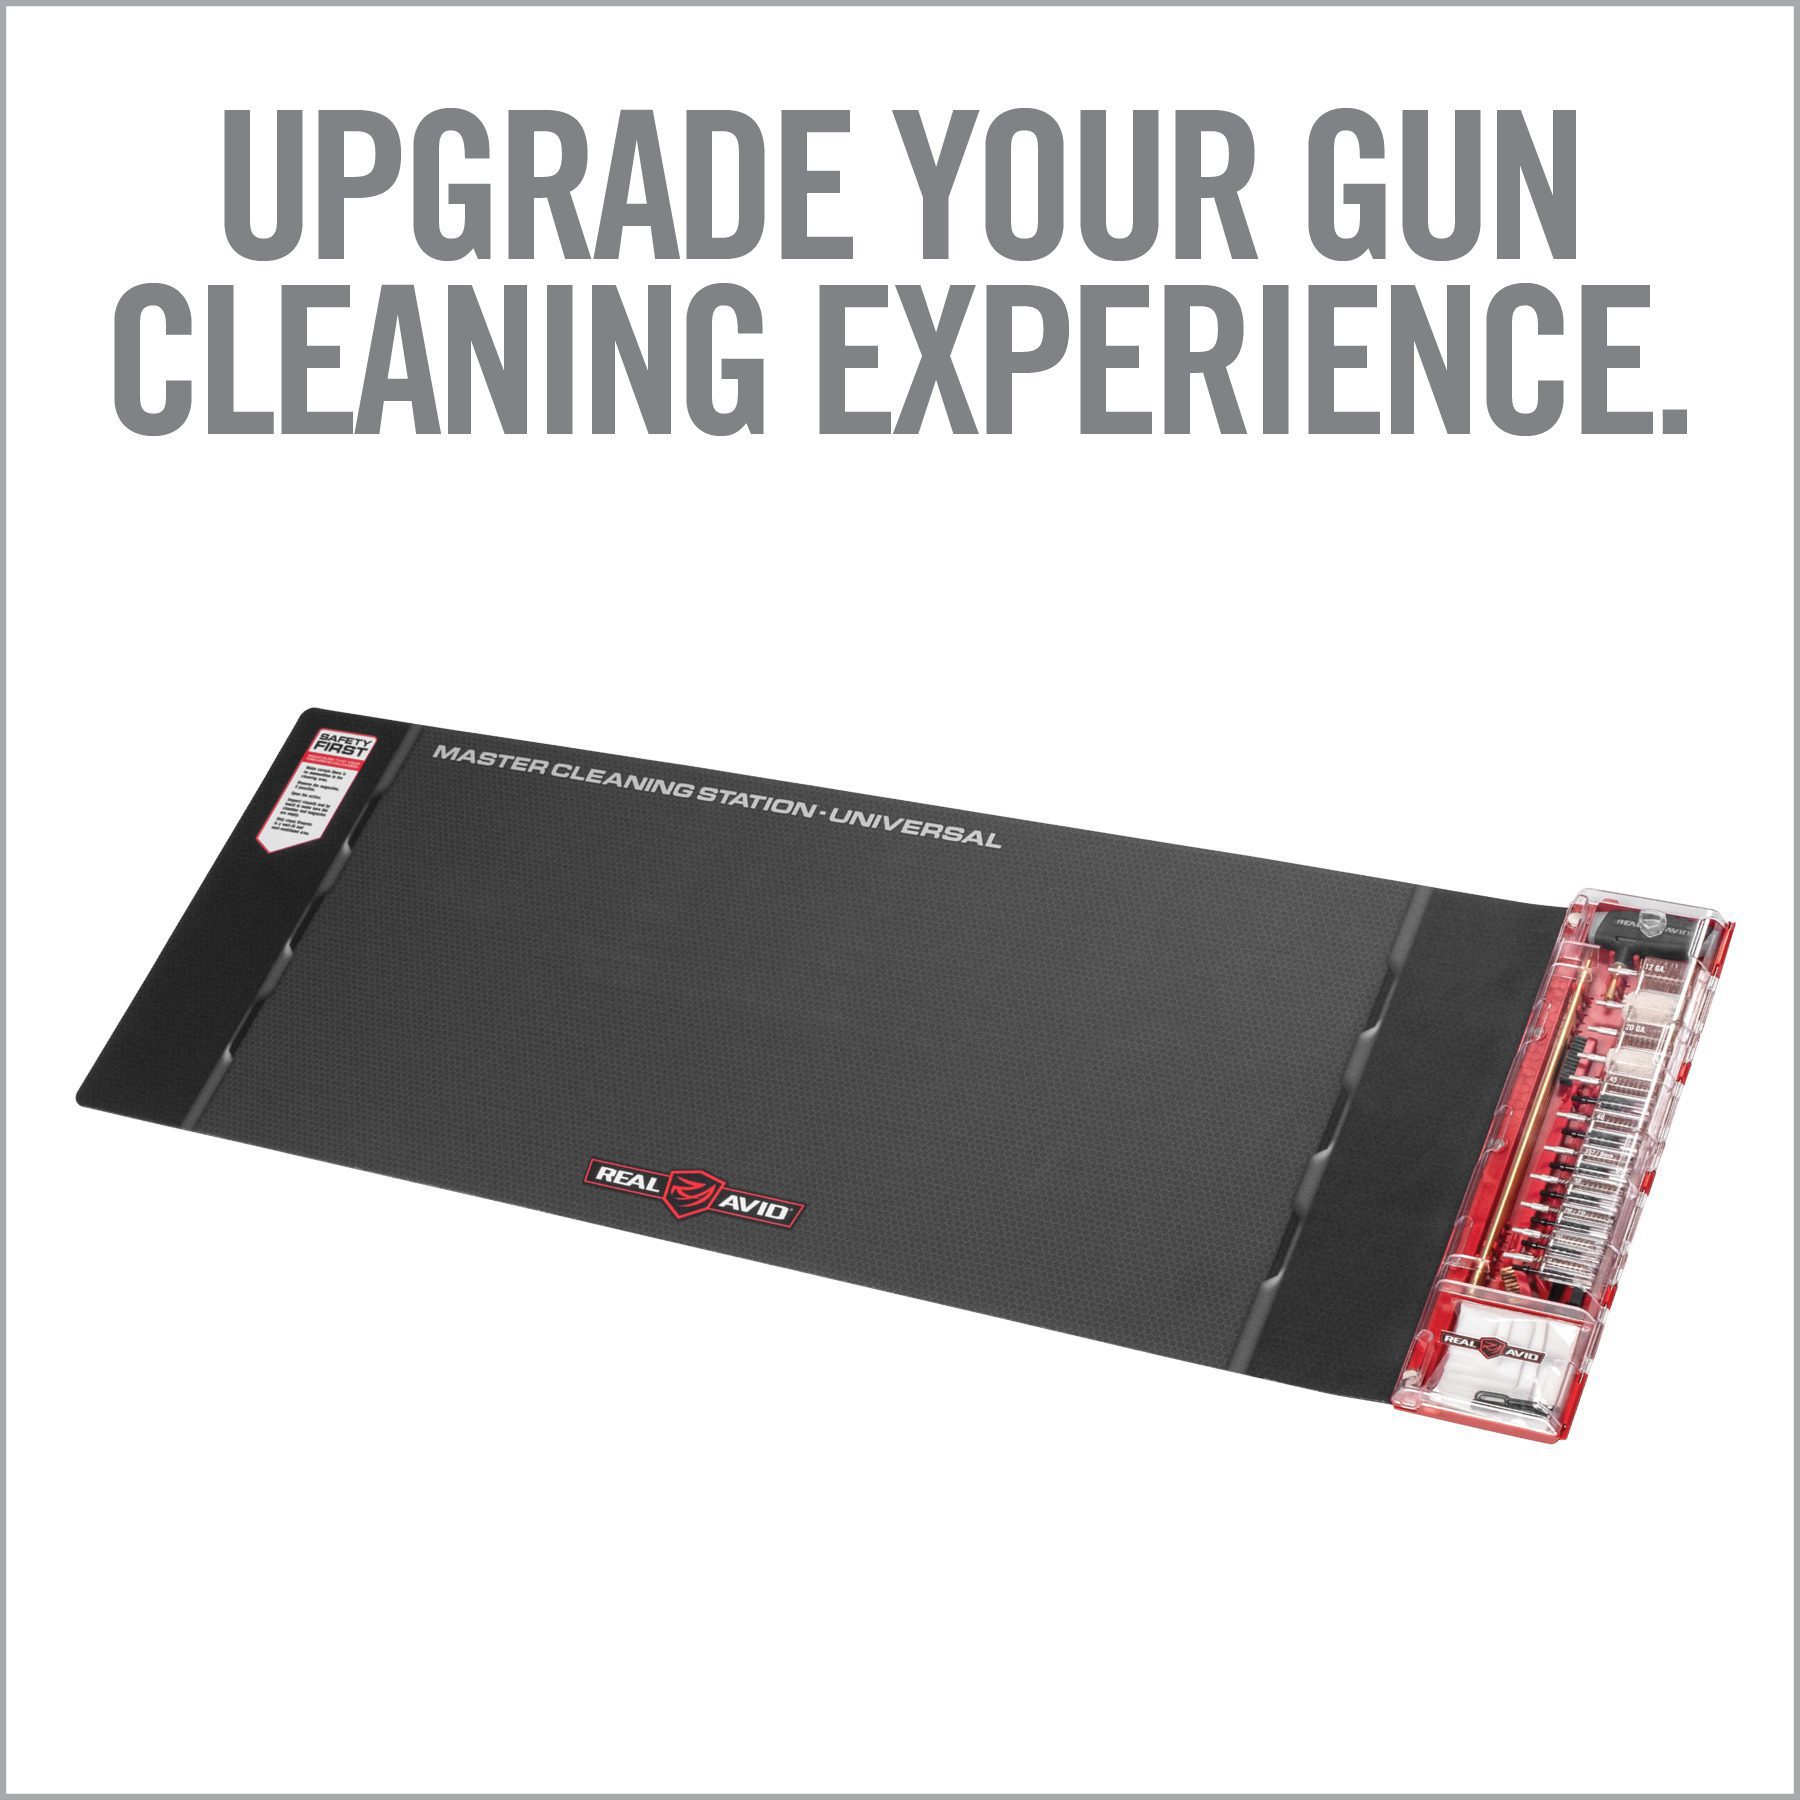 an advertisement for the gun cleaning experience